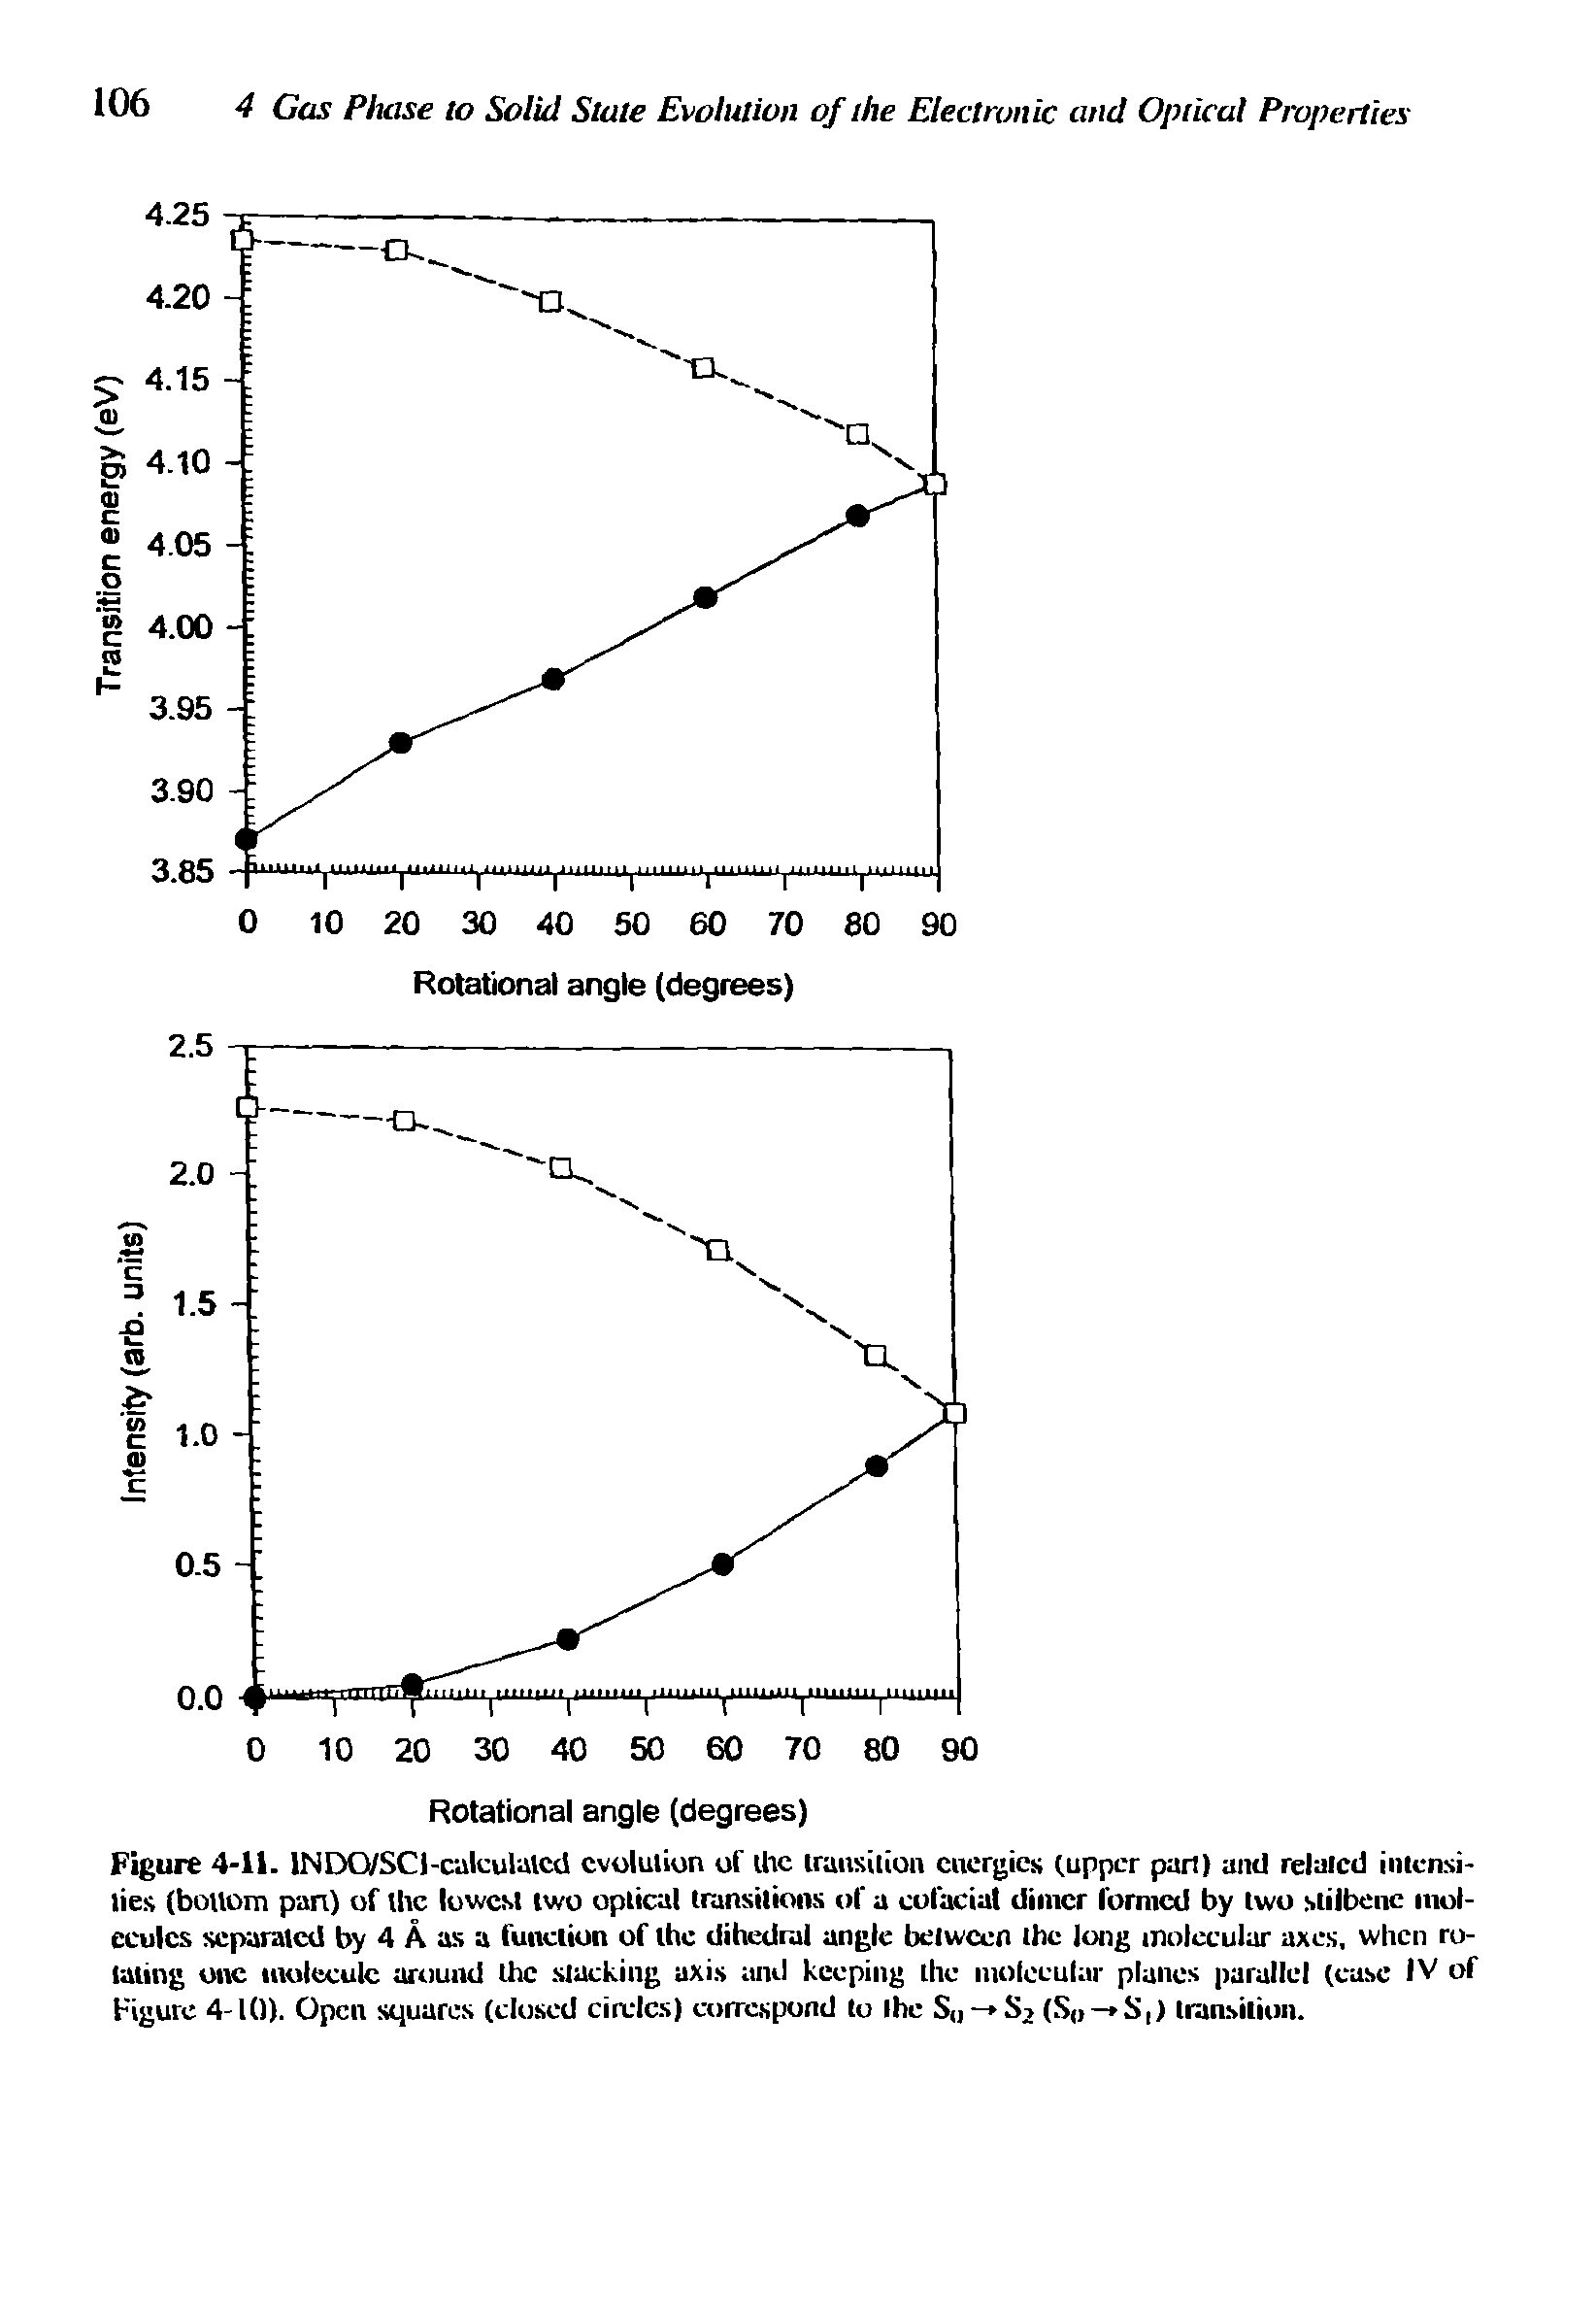 Figure 4-11. INDQ/SCI-caleulalcd evolution of the transition energies (upper pan) and related intensities (bottom pan) of the lowest two optical transitions of a cofacial dimer formed by two stilbenc molecules separated by 4 A as a function of the dihedral angle between the long molecular axes, when rotating one molecule around the stacking axis and keeping the molecular planes parallel (case IV of Figure 4-10). Open squares (dosed circles) correspond to the S(J - S2 (S0 — S, > transition.